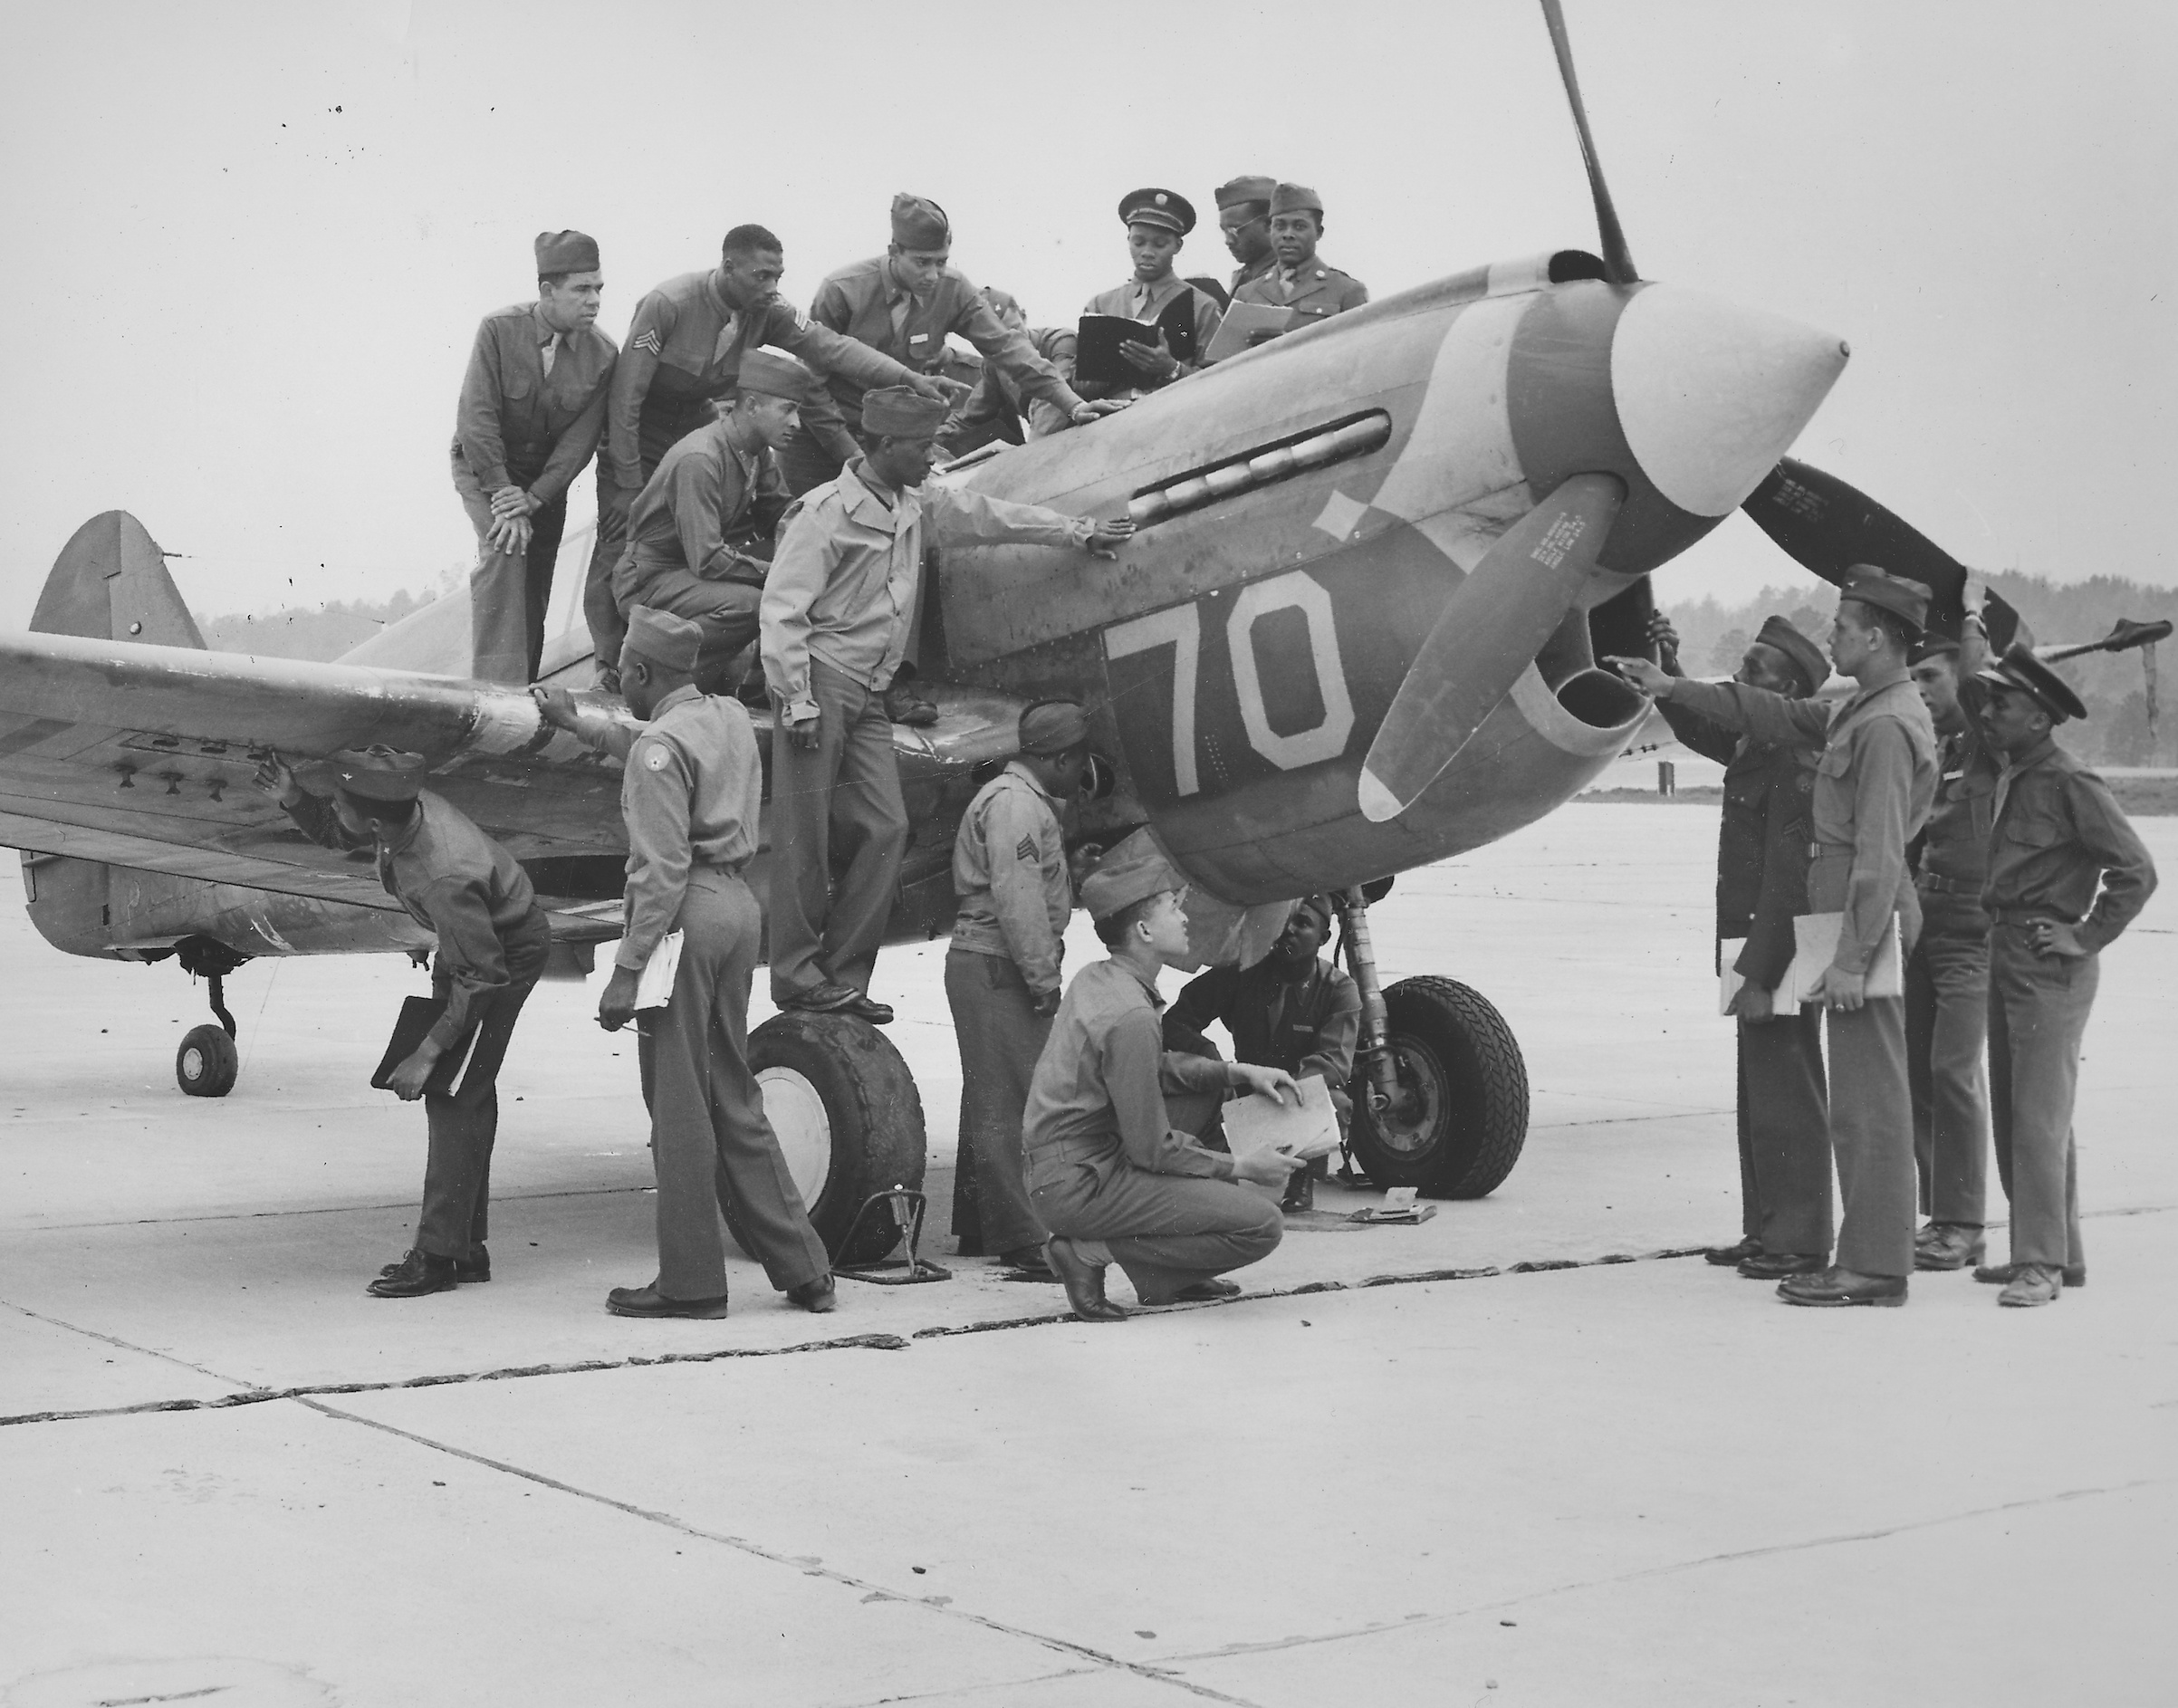 Tuskegee Airmen, with fighter airplane, at Tuskegee Army Flying School during World War II, Tuskegee, Ala., 1944. (Getty Images)